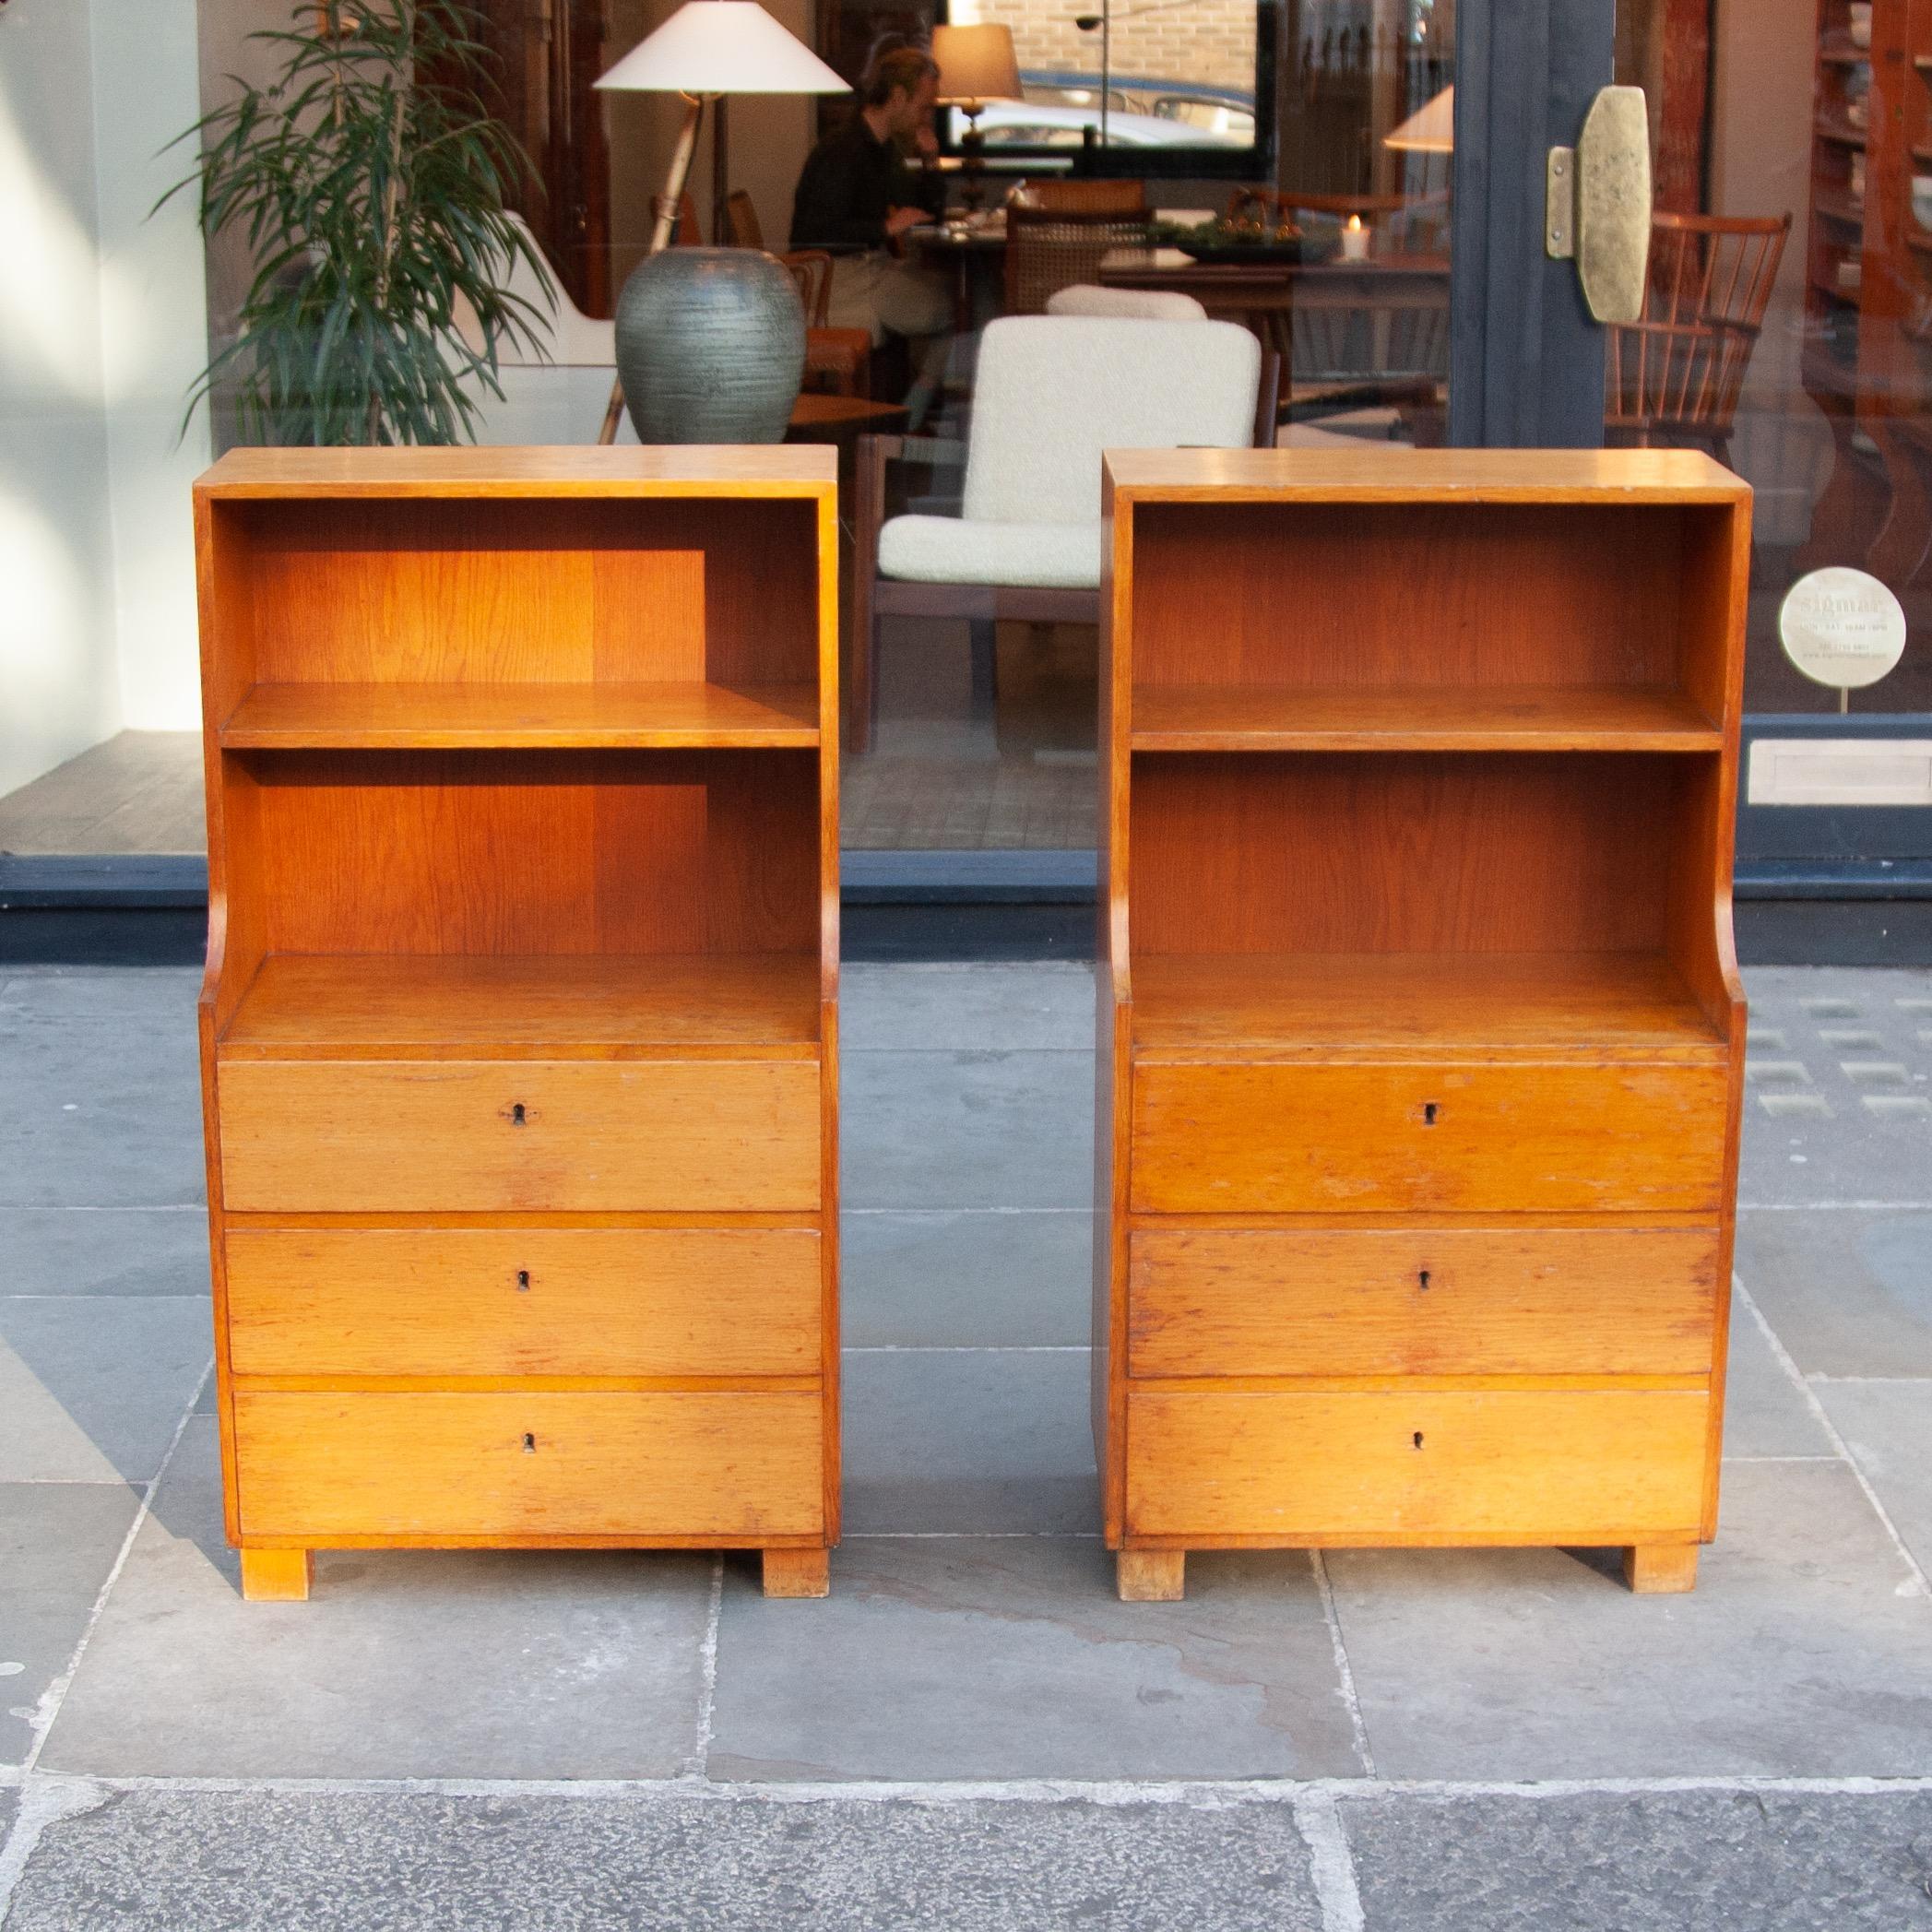 A pair of bedside cabinets by Rud. Rasmussen, Denmark, 1930s.Made of solid teak with a wonderful even patina. These cabinets rest on block feet, grounding their slender torsos created through a comfortable slope on their edges. Their forms are